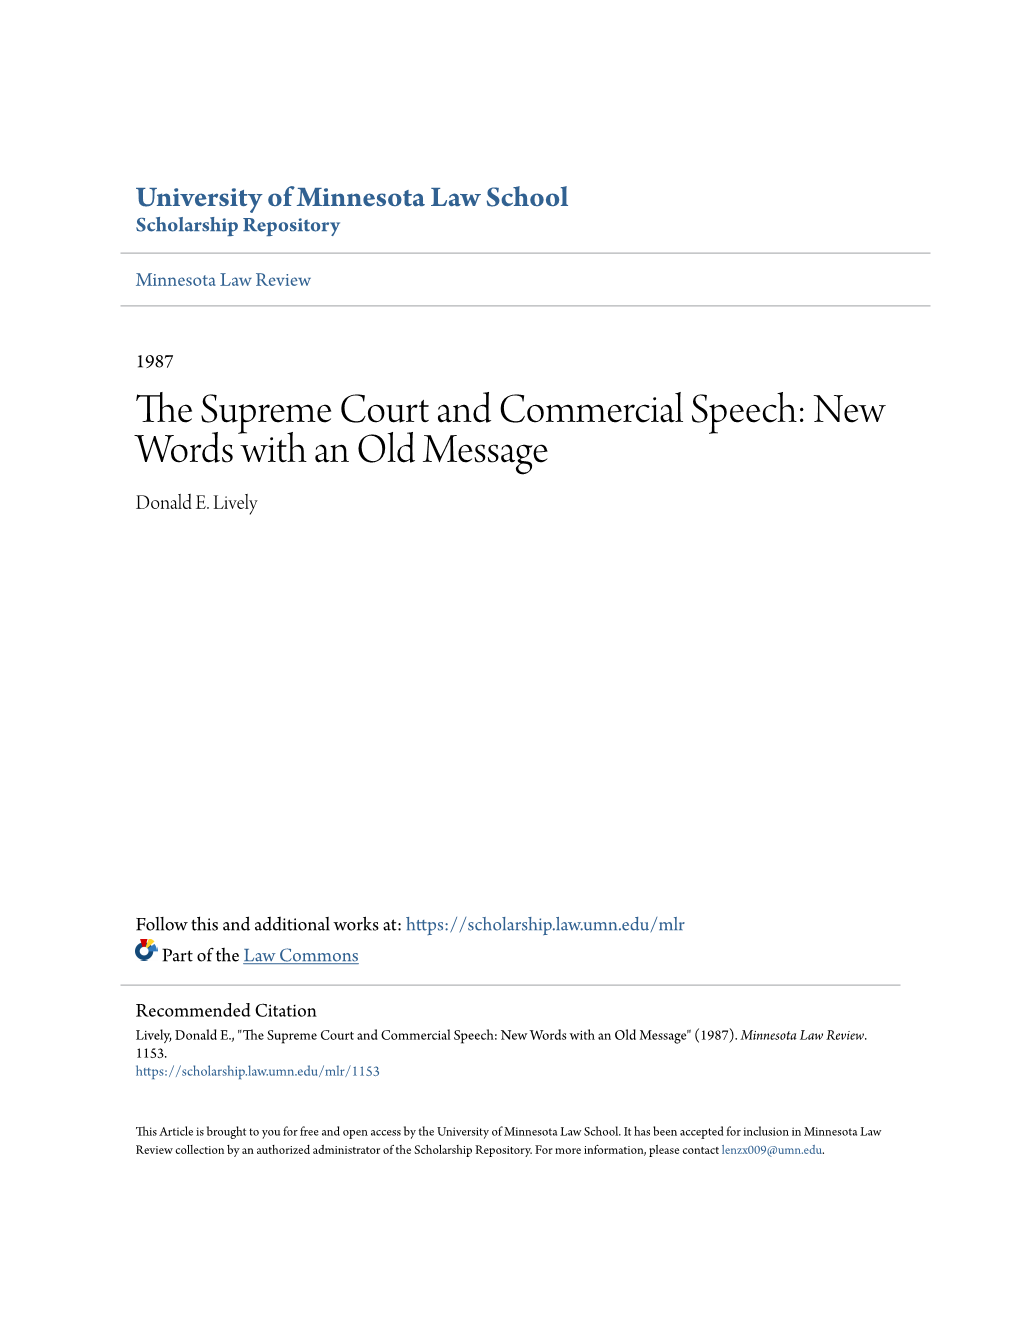 The Supreme Court and Commercial Speech: New Words with an Old Message